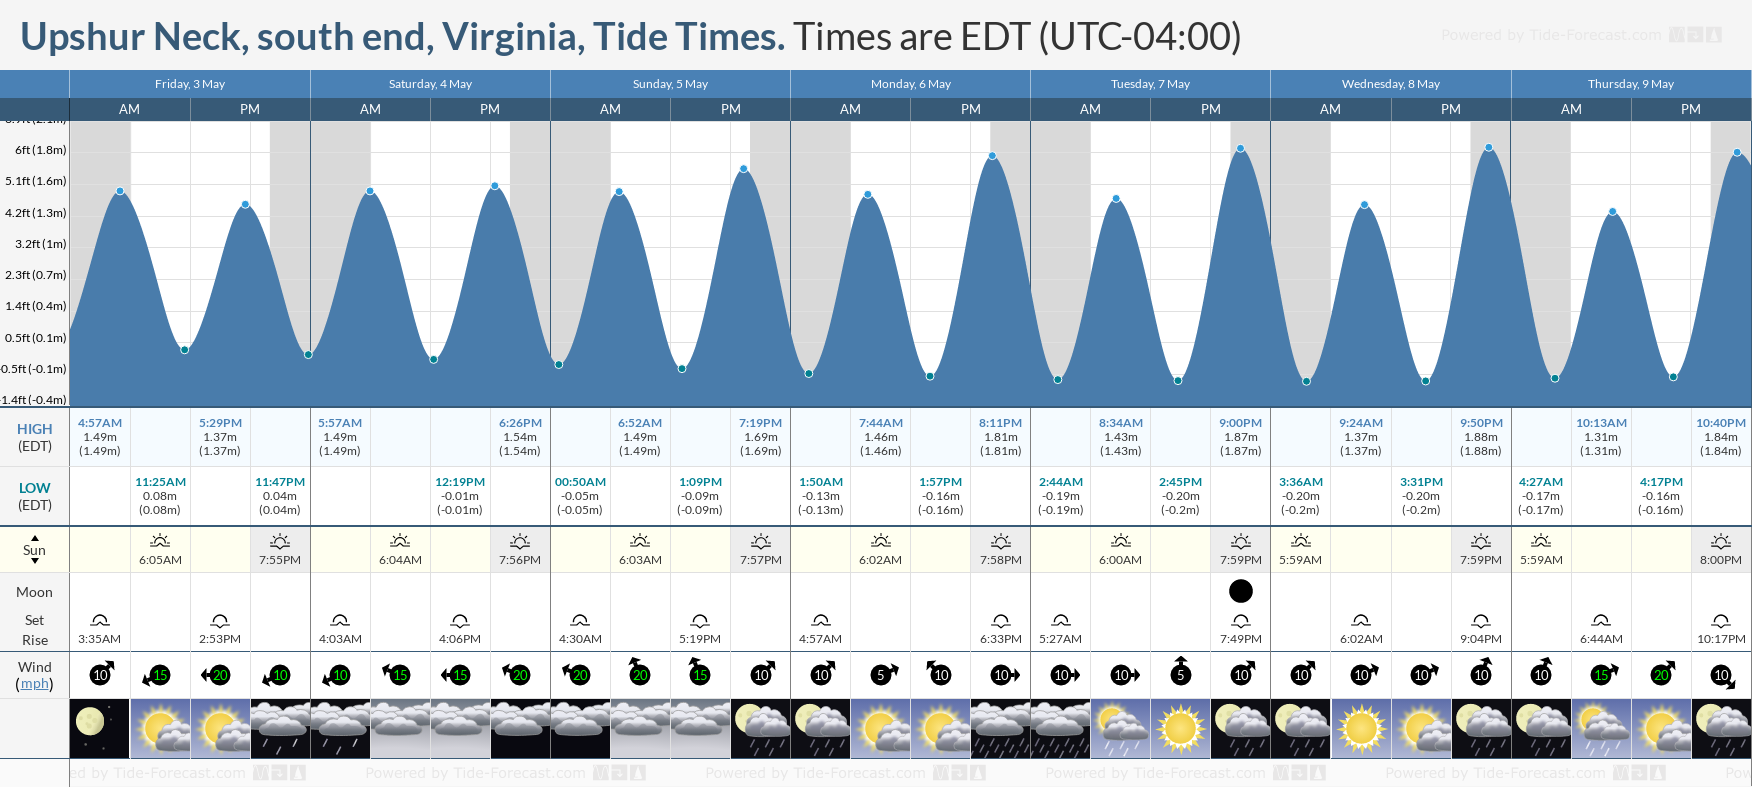 Upshur Neck, south end, Virginia Tide Chart including high and low tide tide times for the next 7 days